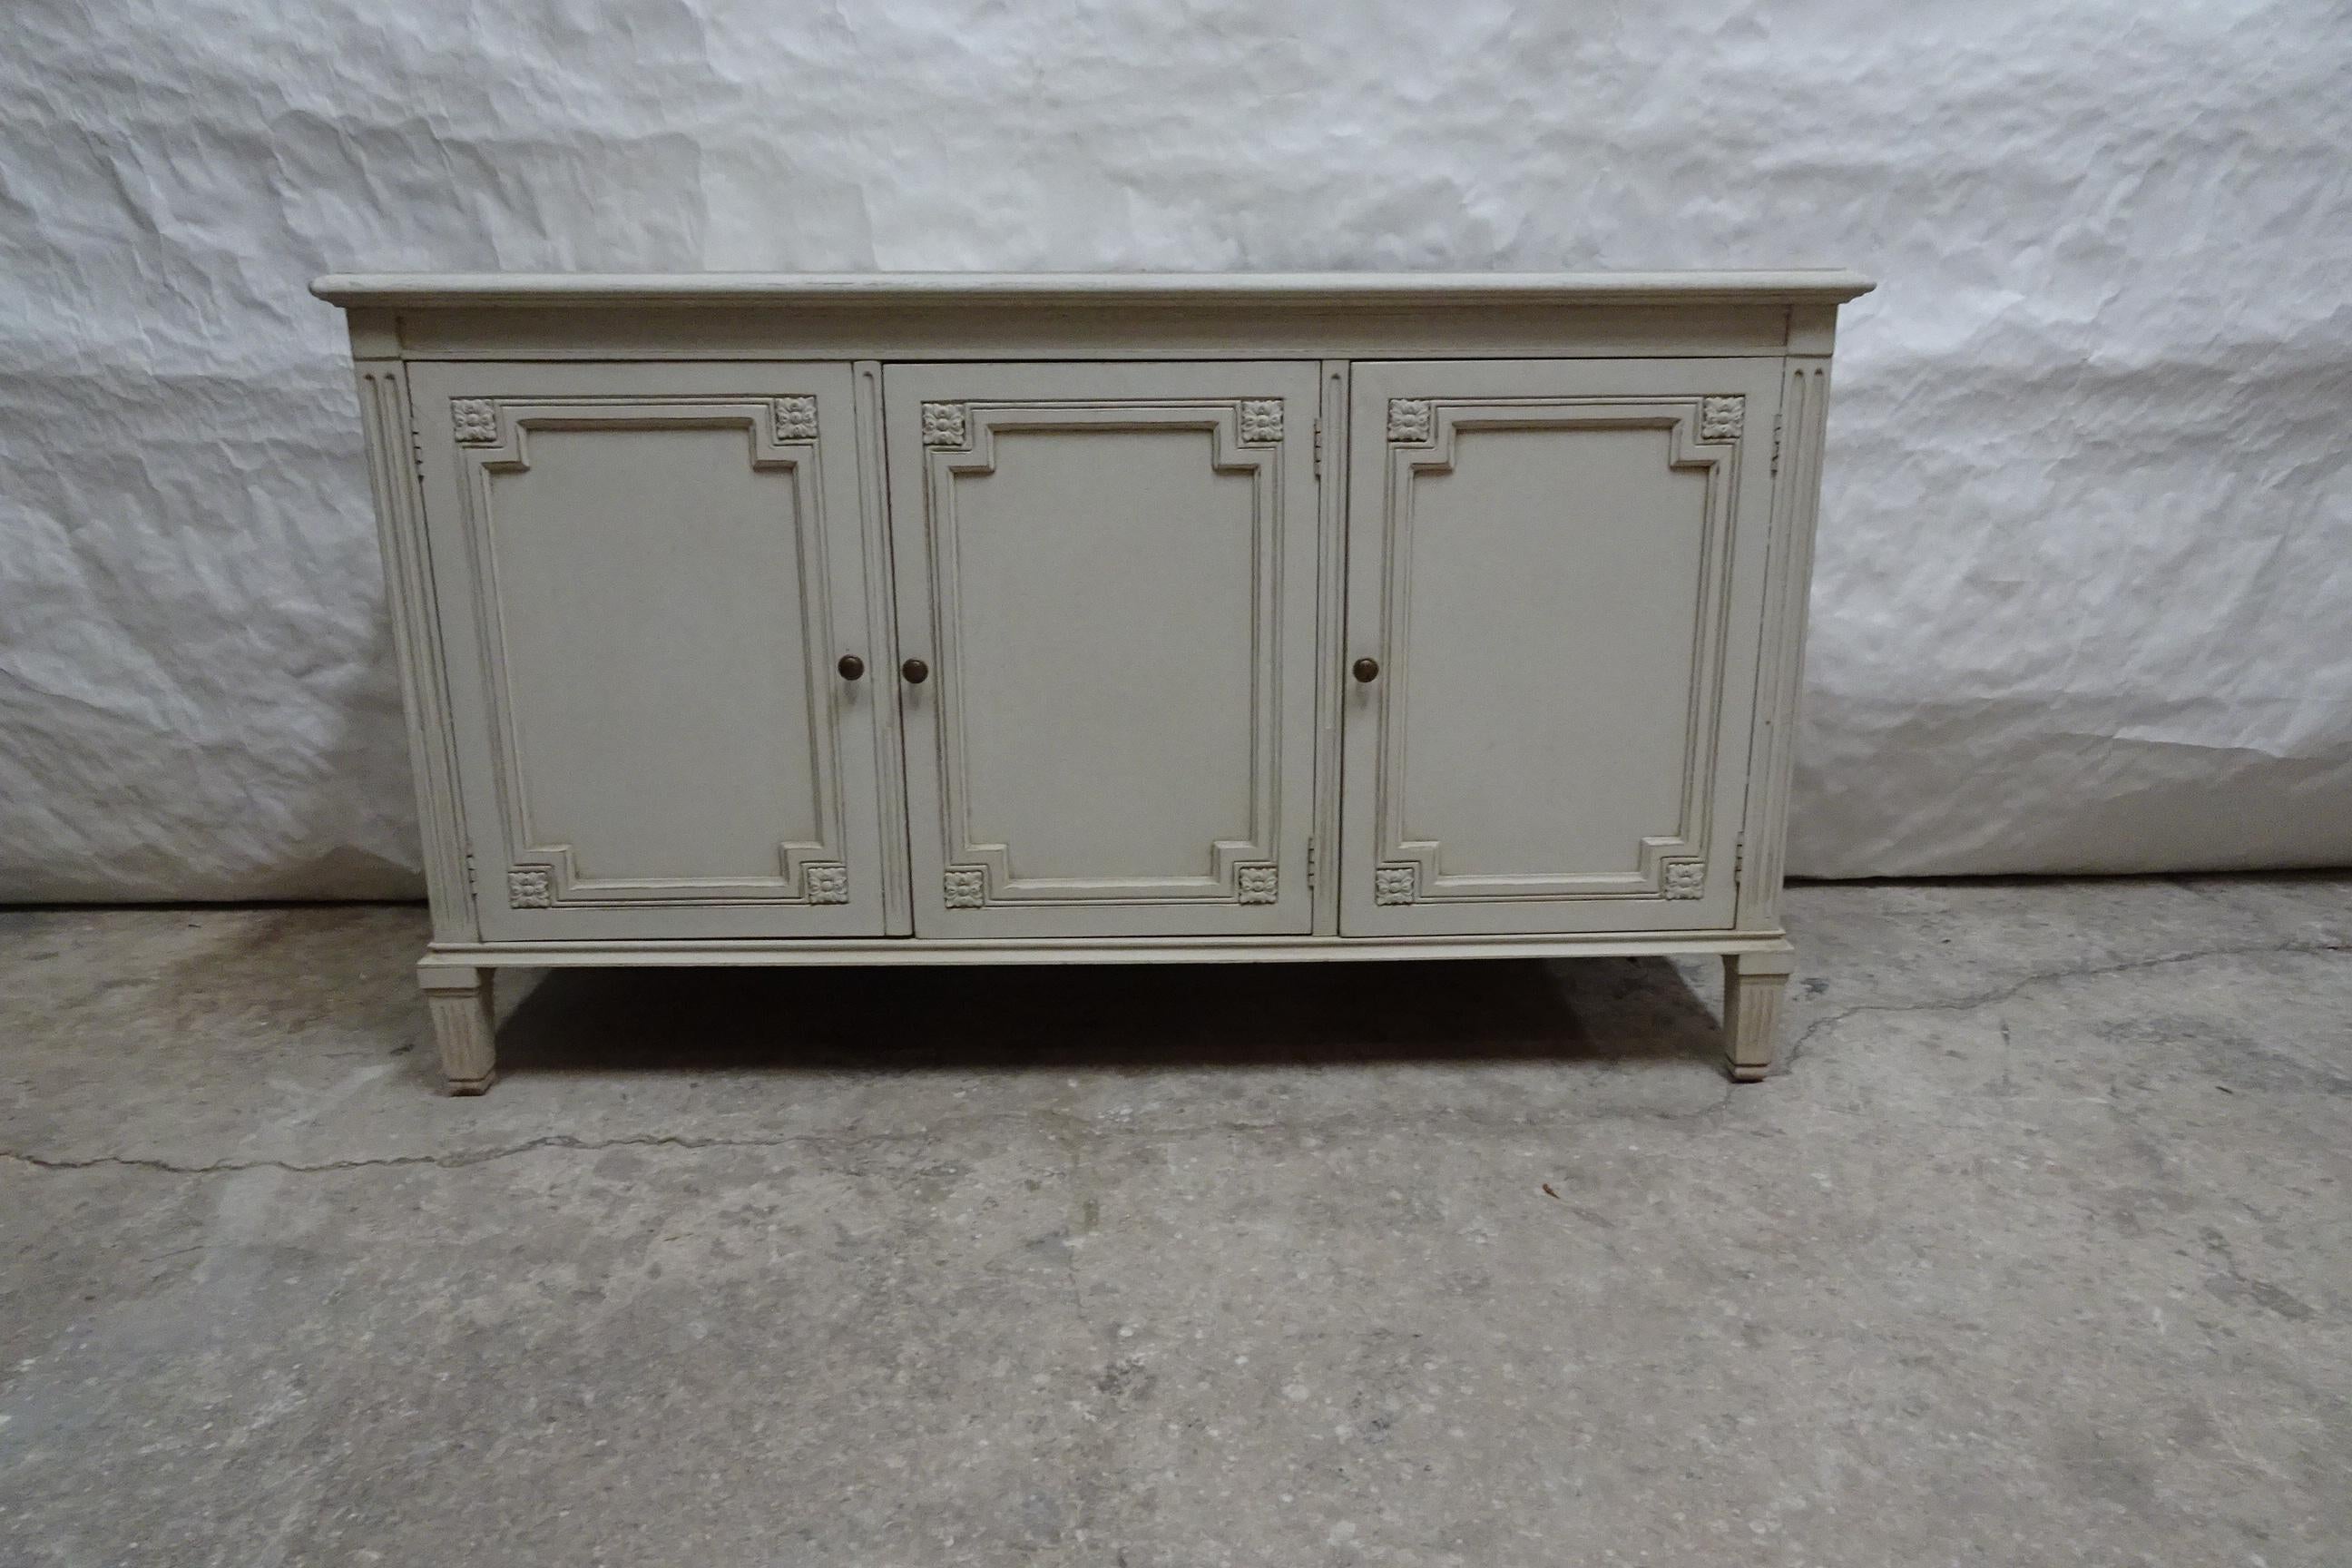 This is a unique Gustavian Style 3 Door Sideboard, its been restored and repainted with Milk Paints 